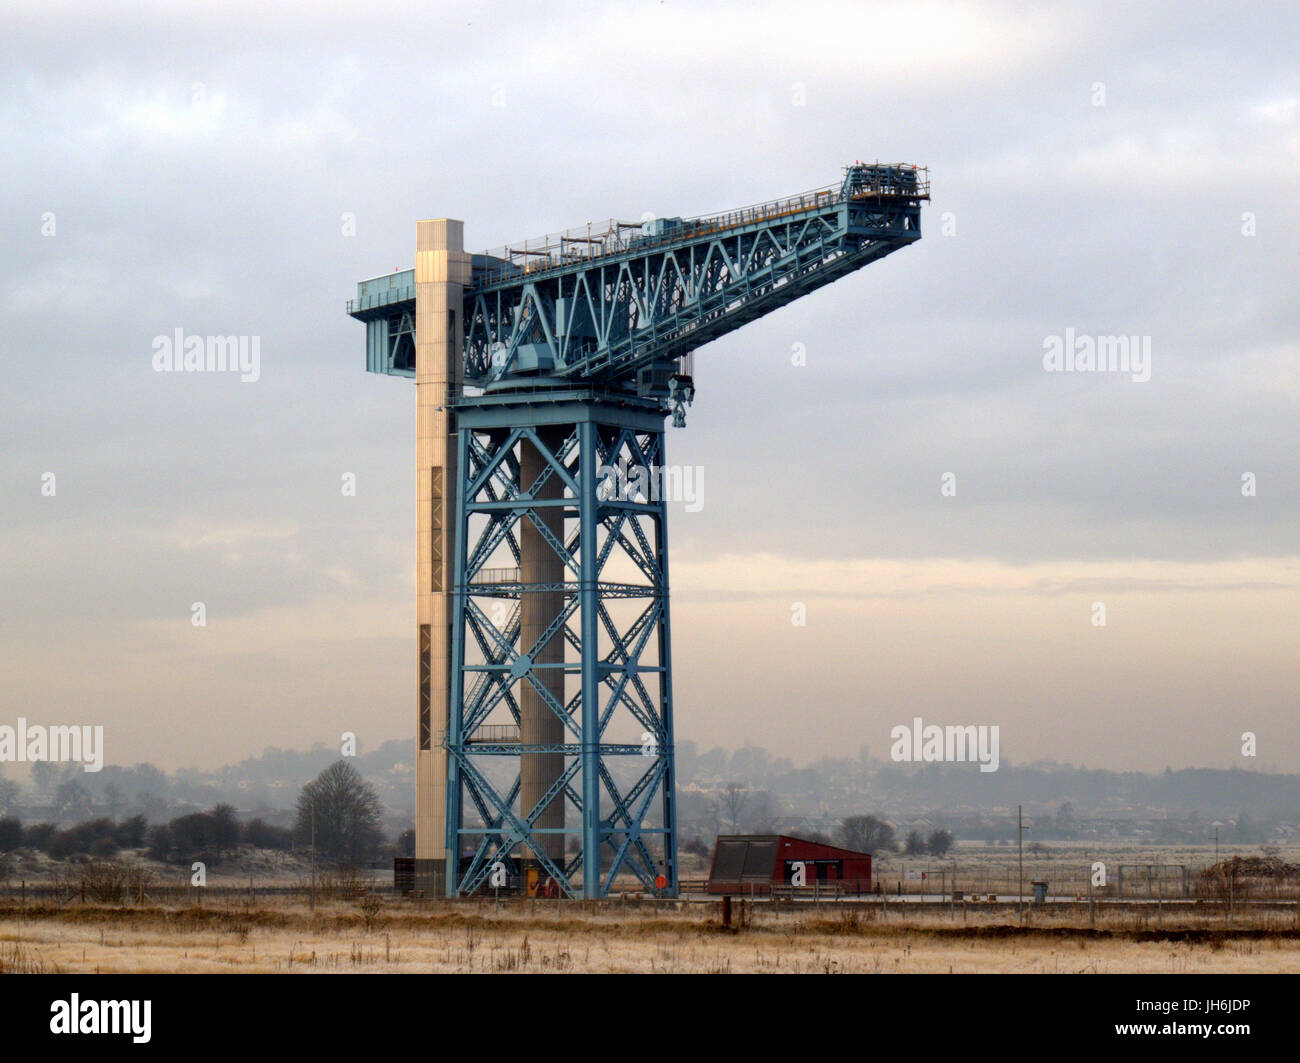 Clydebank Titan crane at dusk on the site of the old john brown shipyard that built the QE2 Stock Photo